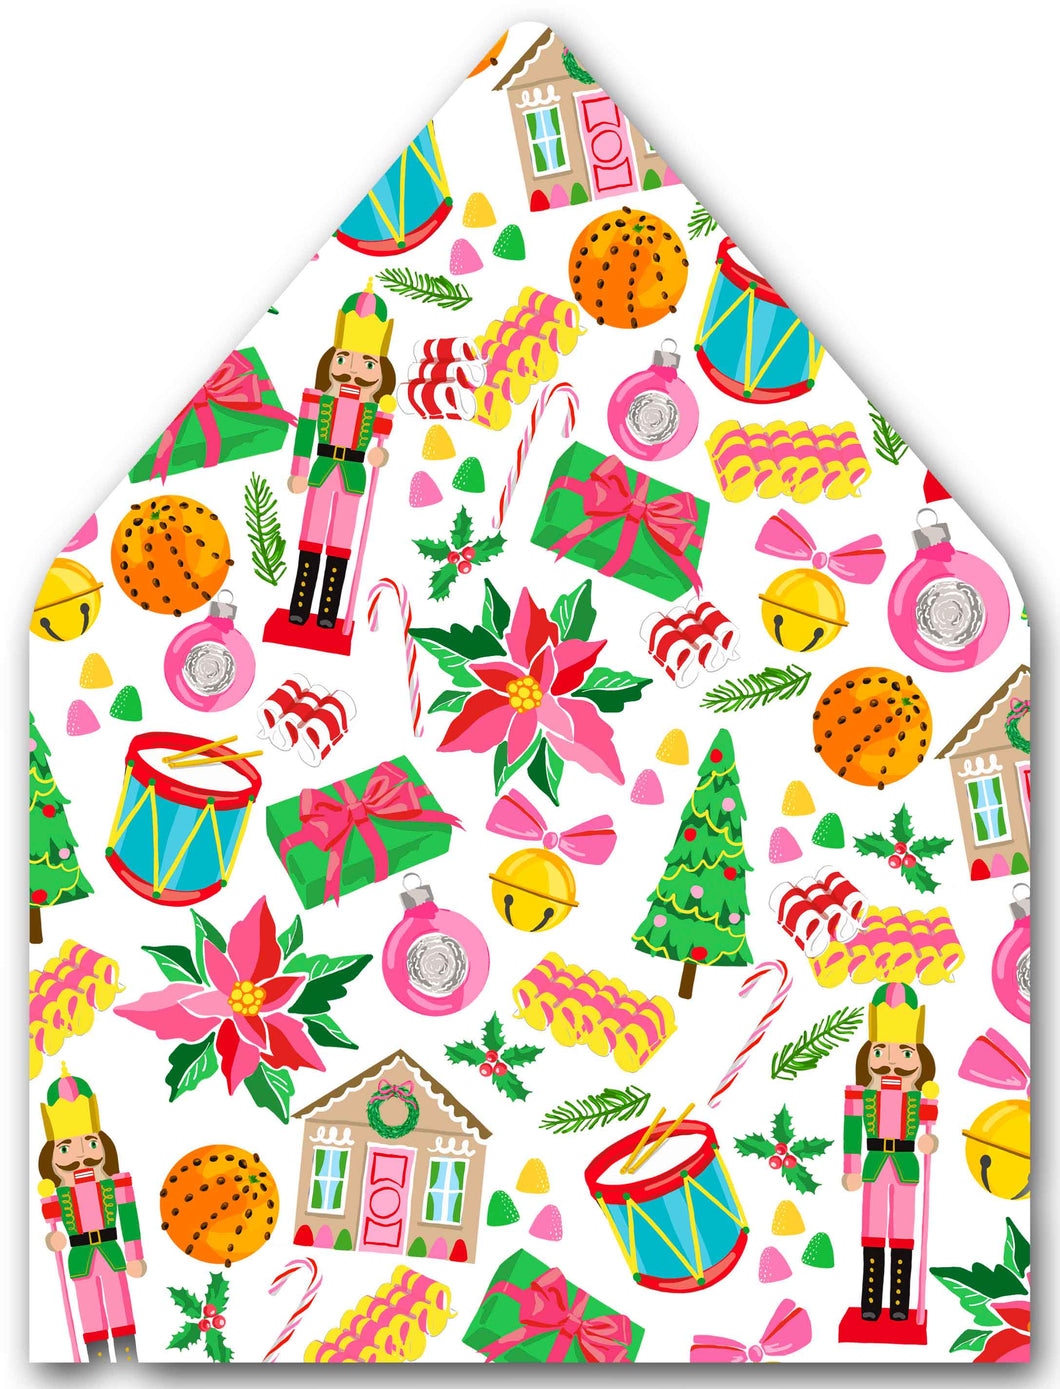 Christmas Crest Coordinate A7 Patterned Envelope Liners